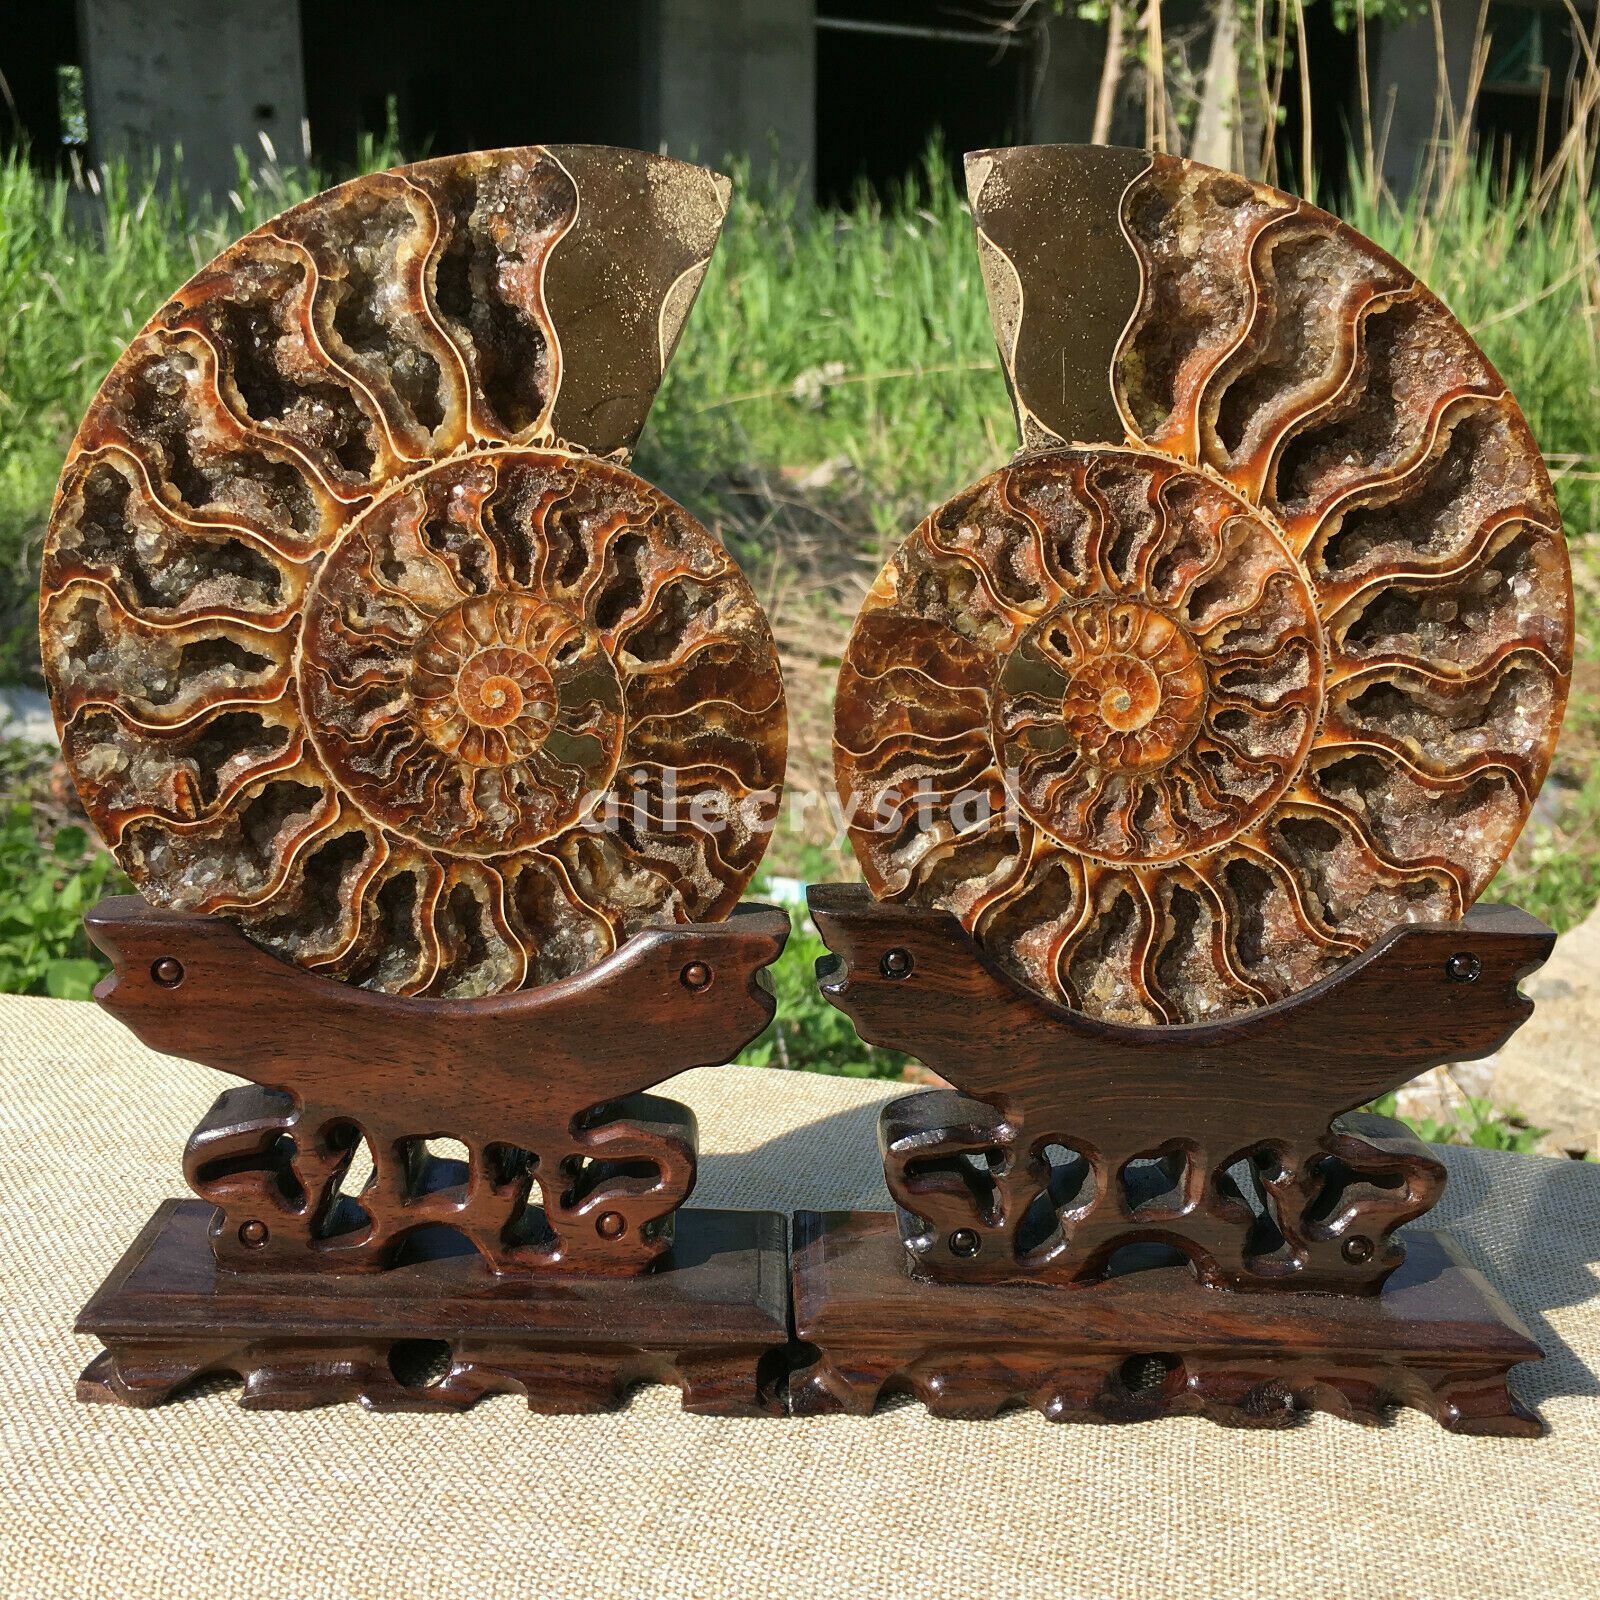 Natural A pair of ammonite fossil conch crystal specimen+stand collection